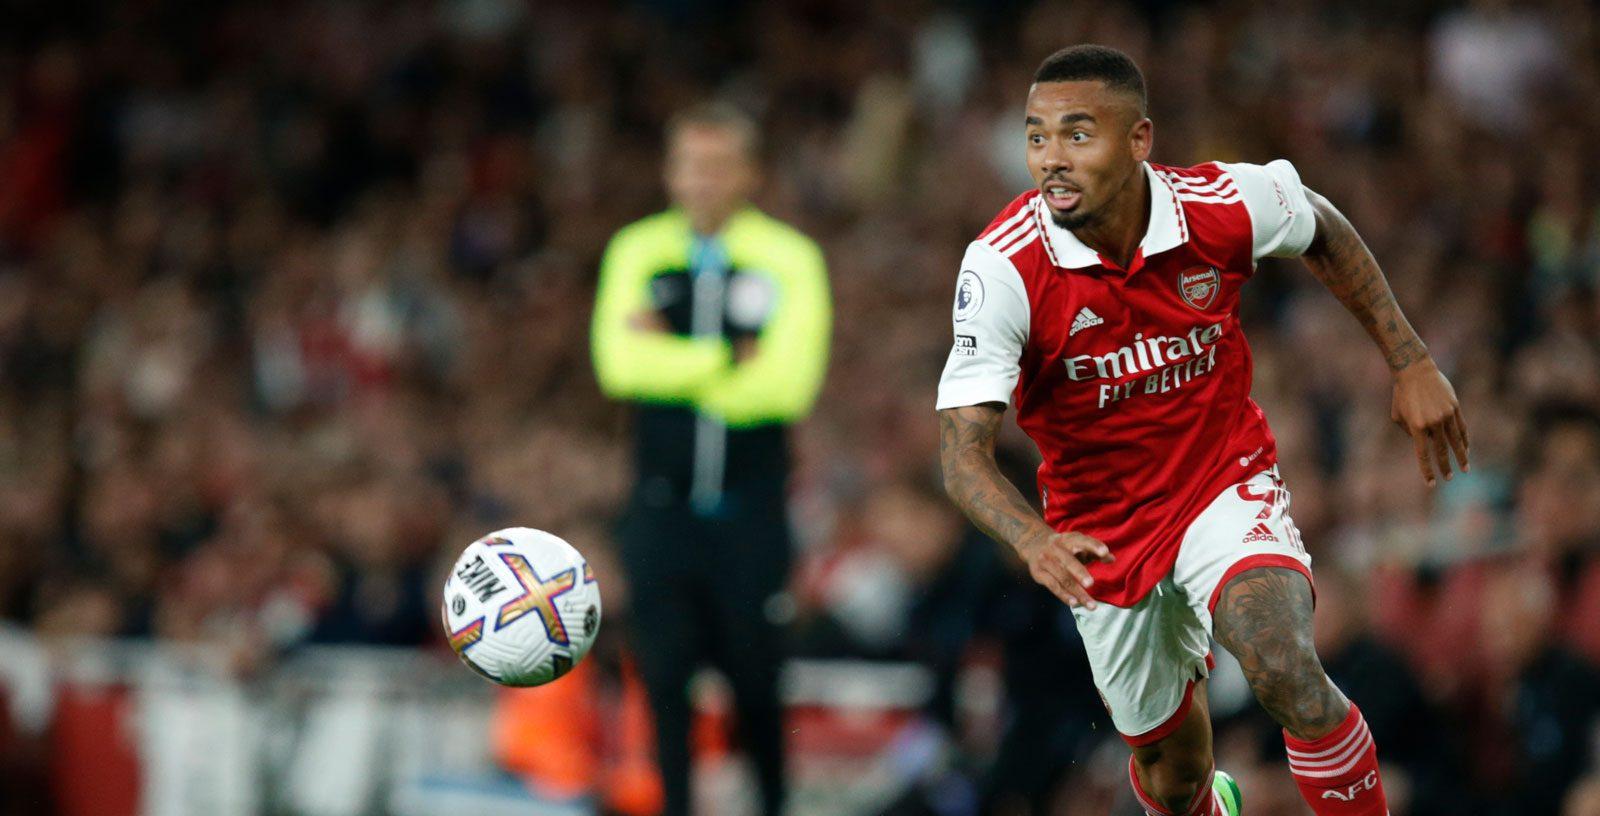 Arsenal vs. Leeds United Predictions, Picks and Betting Odds - Sunday, October 16, 2022